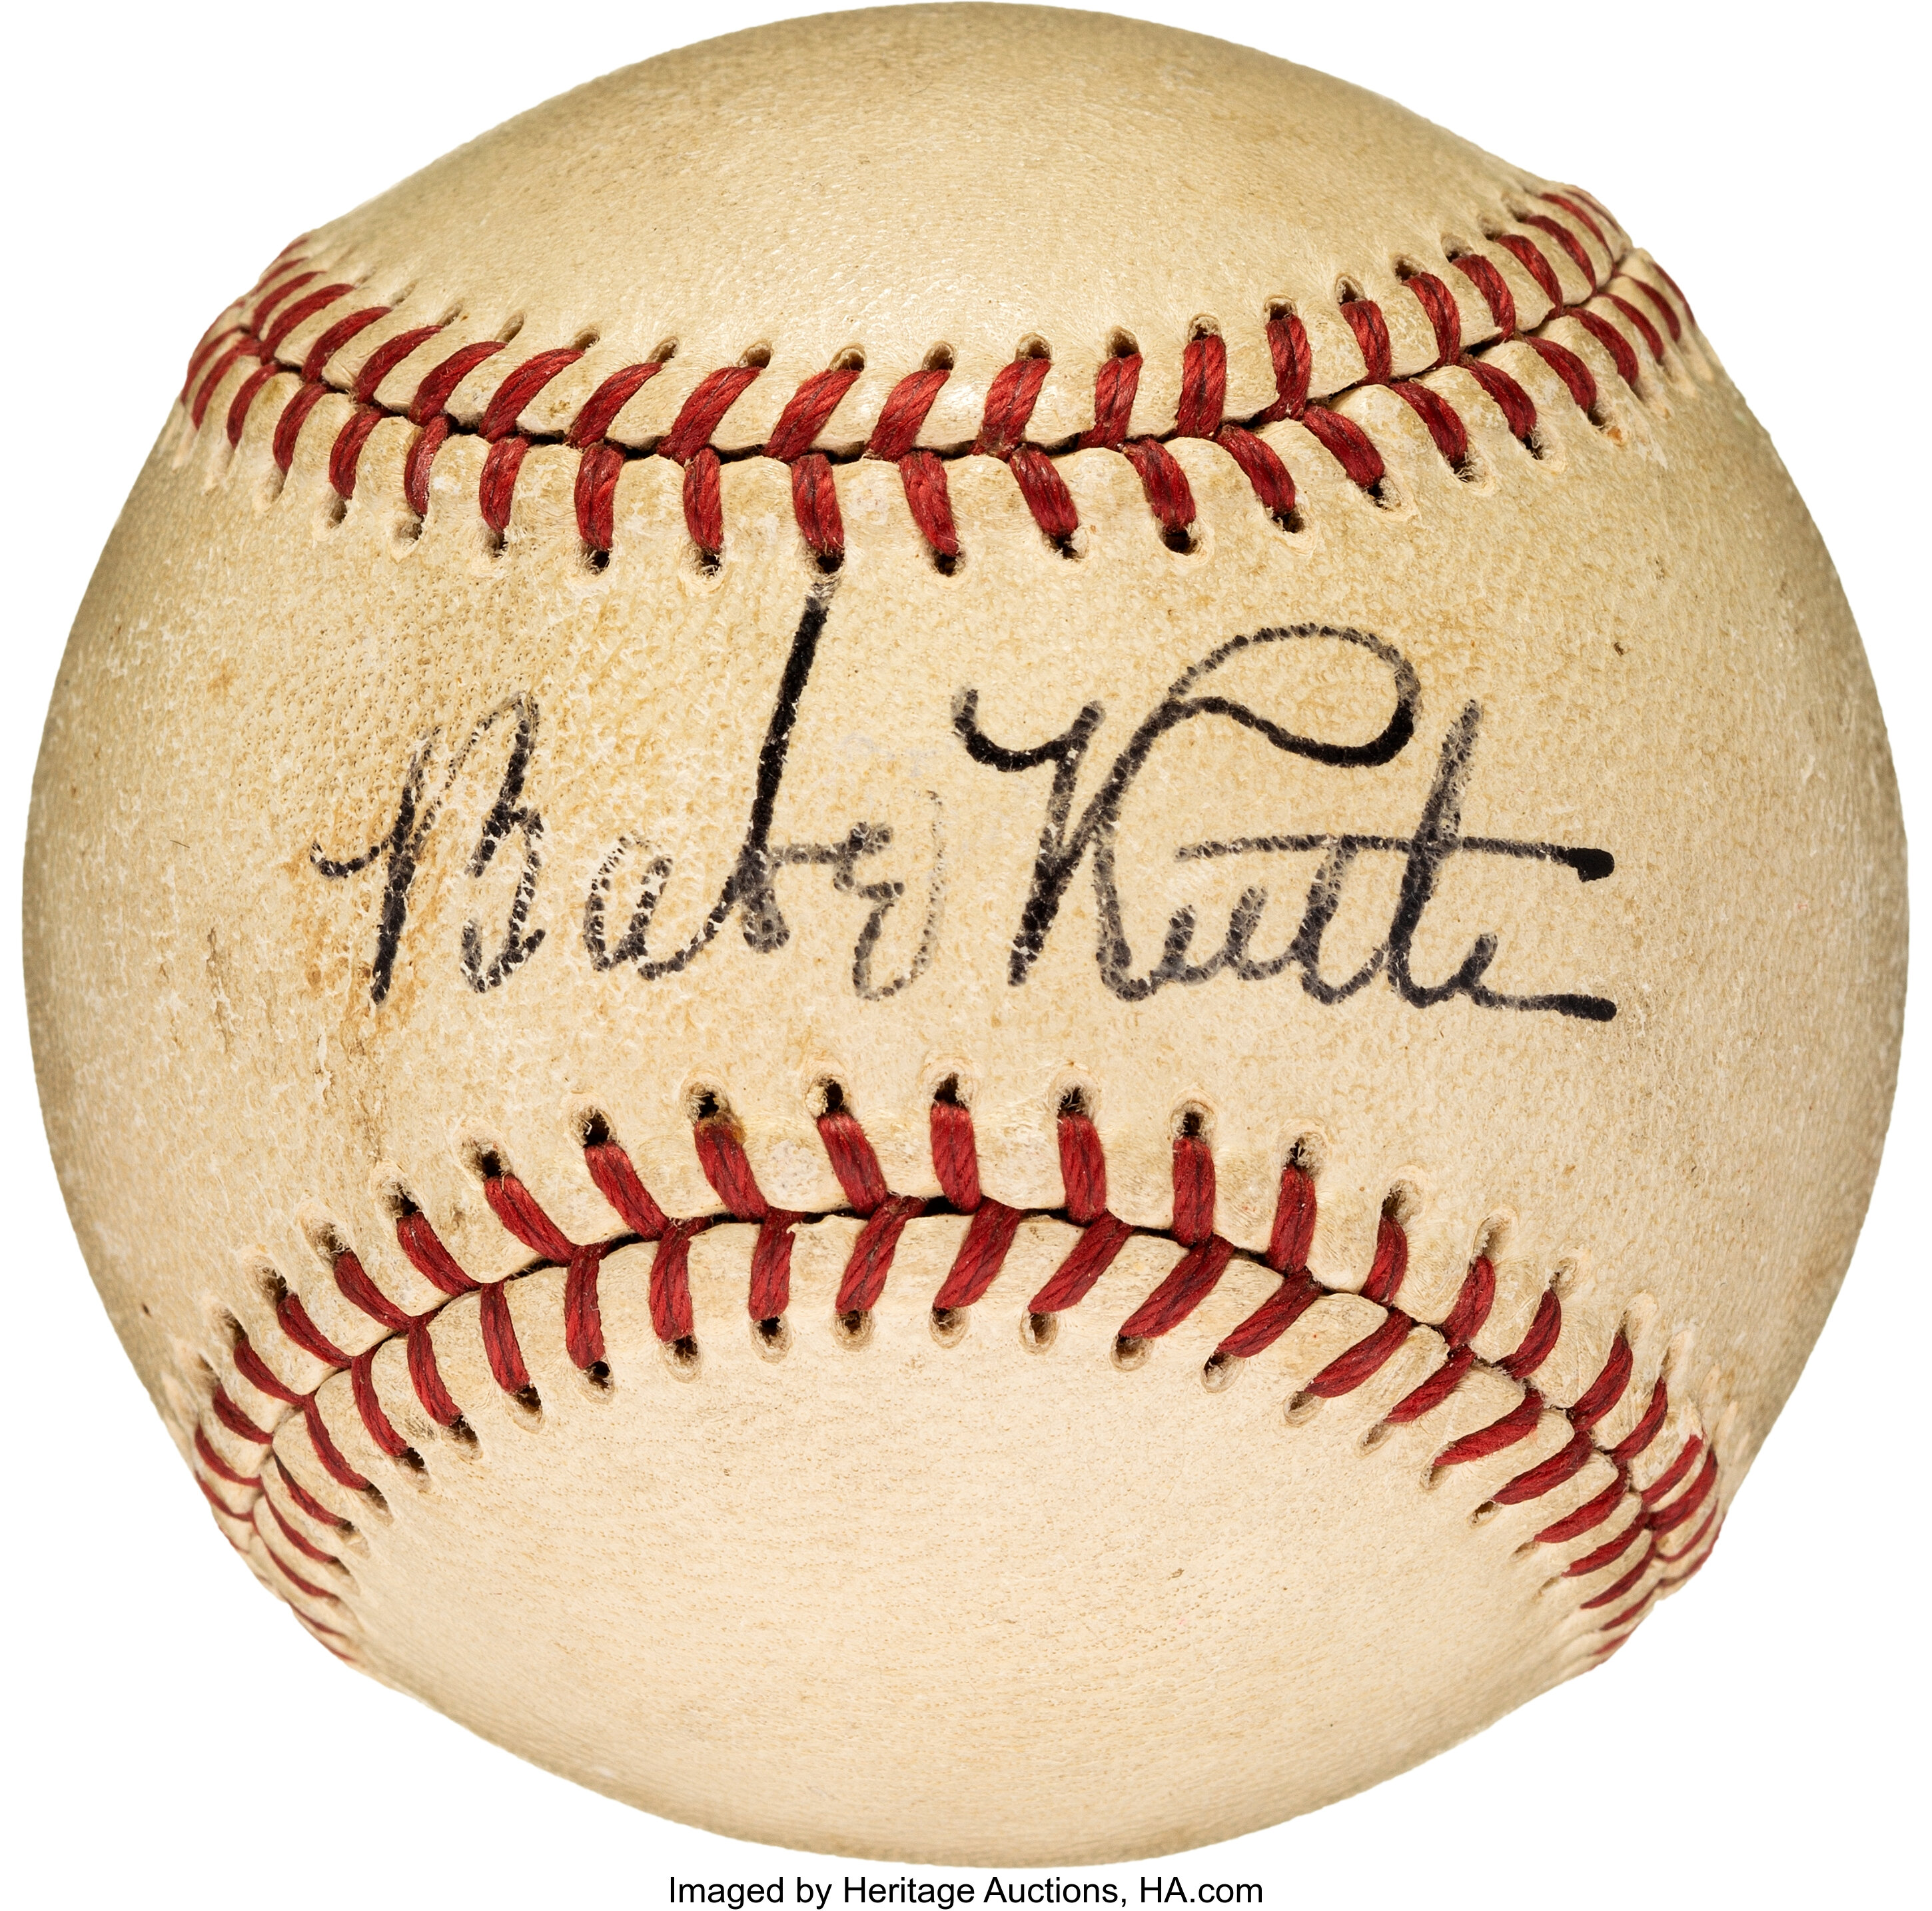 Sold at Auction: Babe Ruth signed 1940s OAL, William Harridge Ball